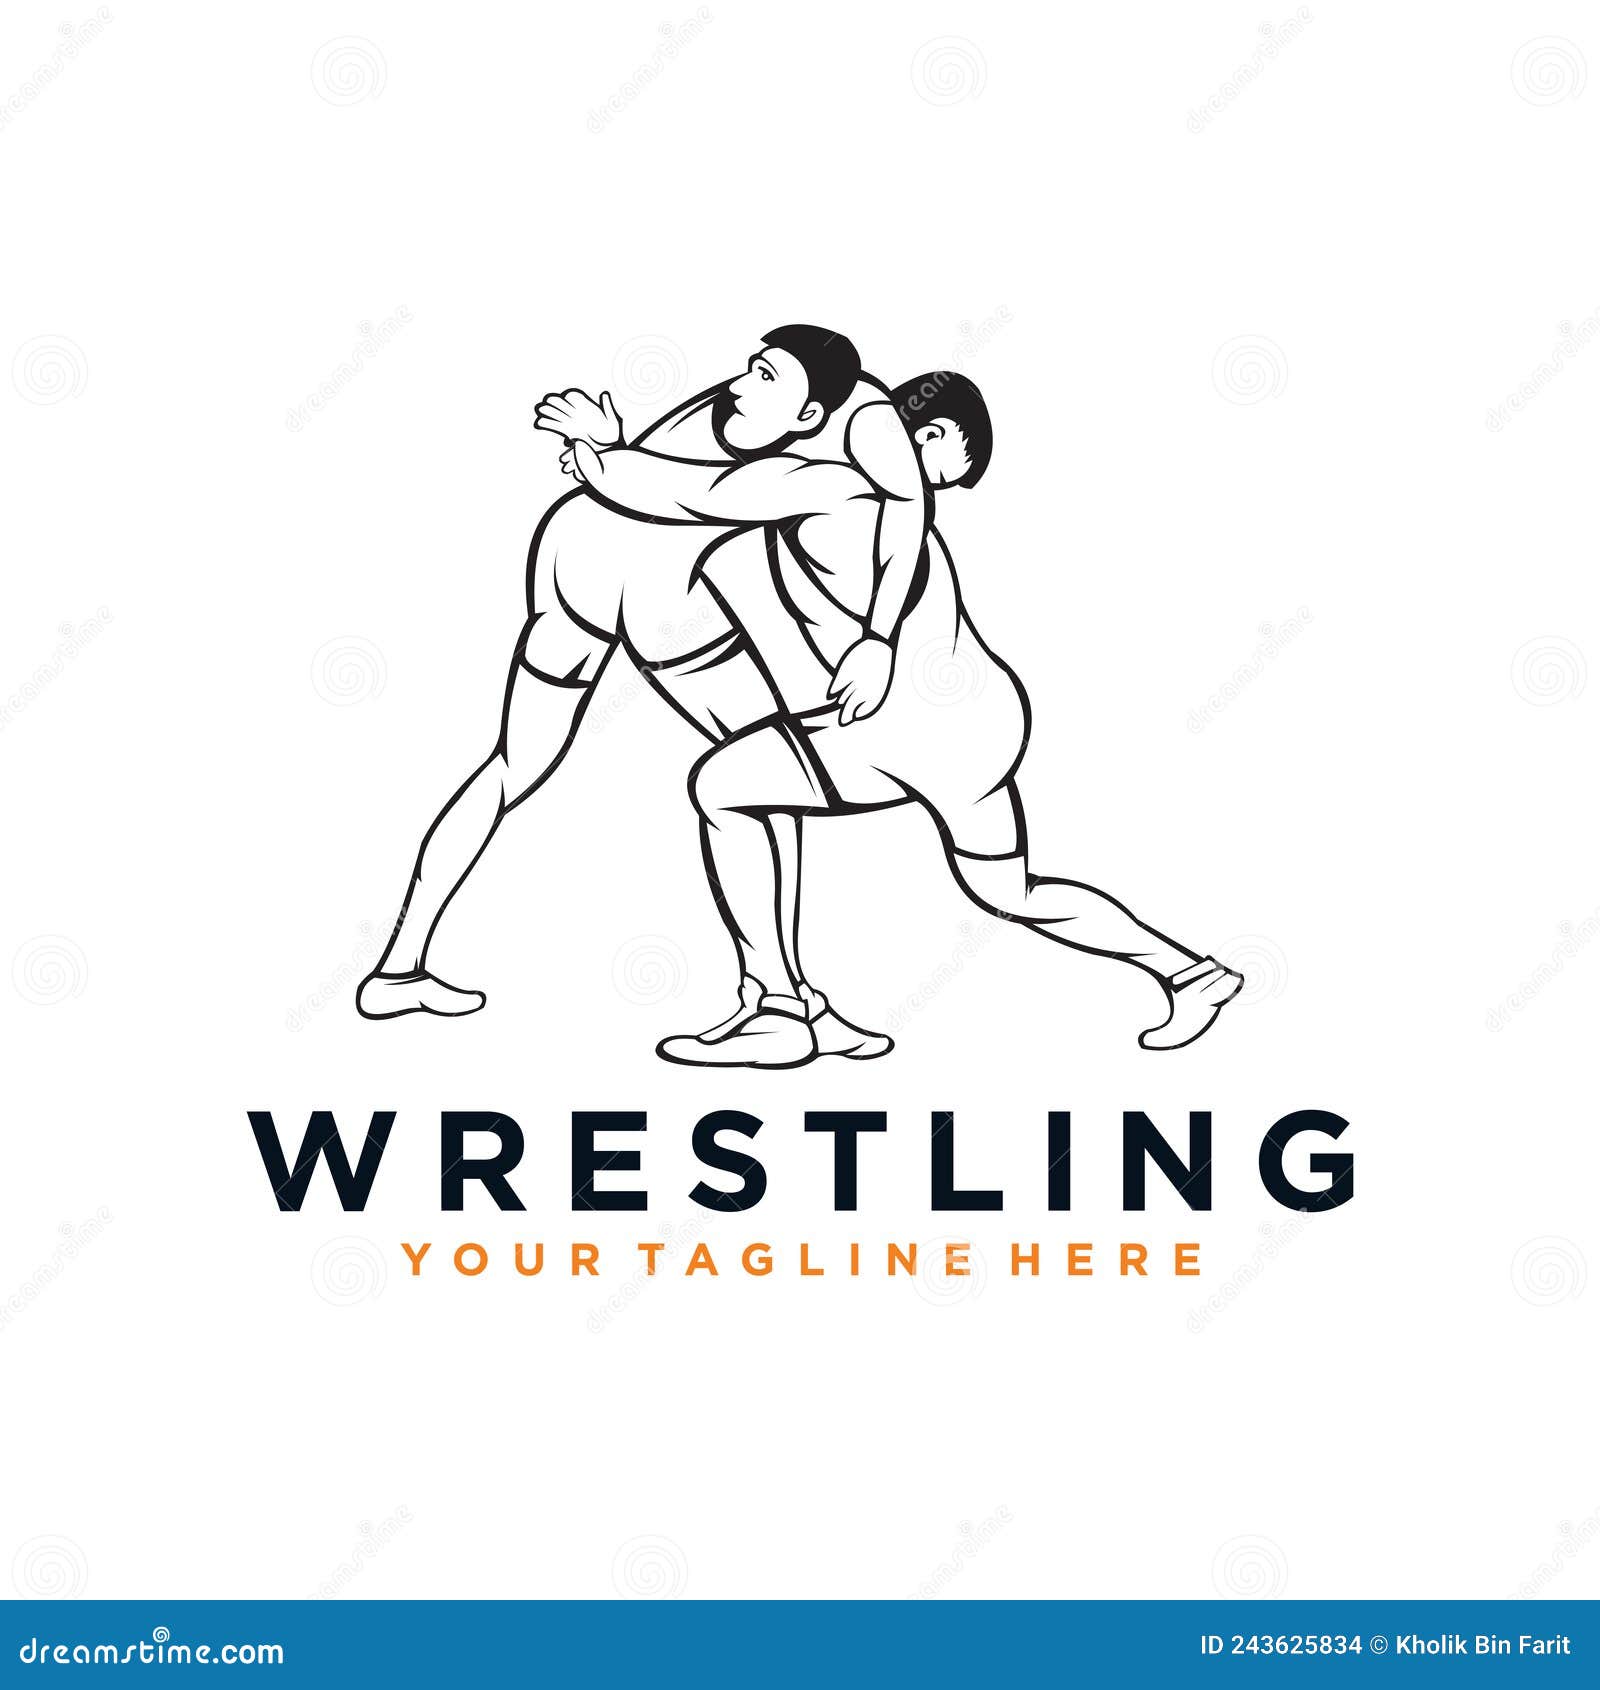 Placeit - Wrestling Logo Template